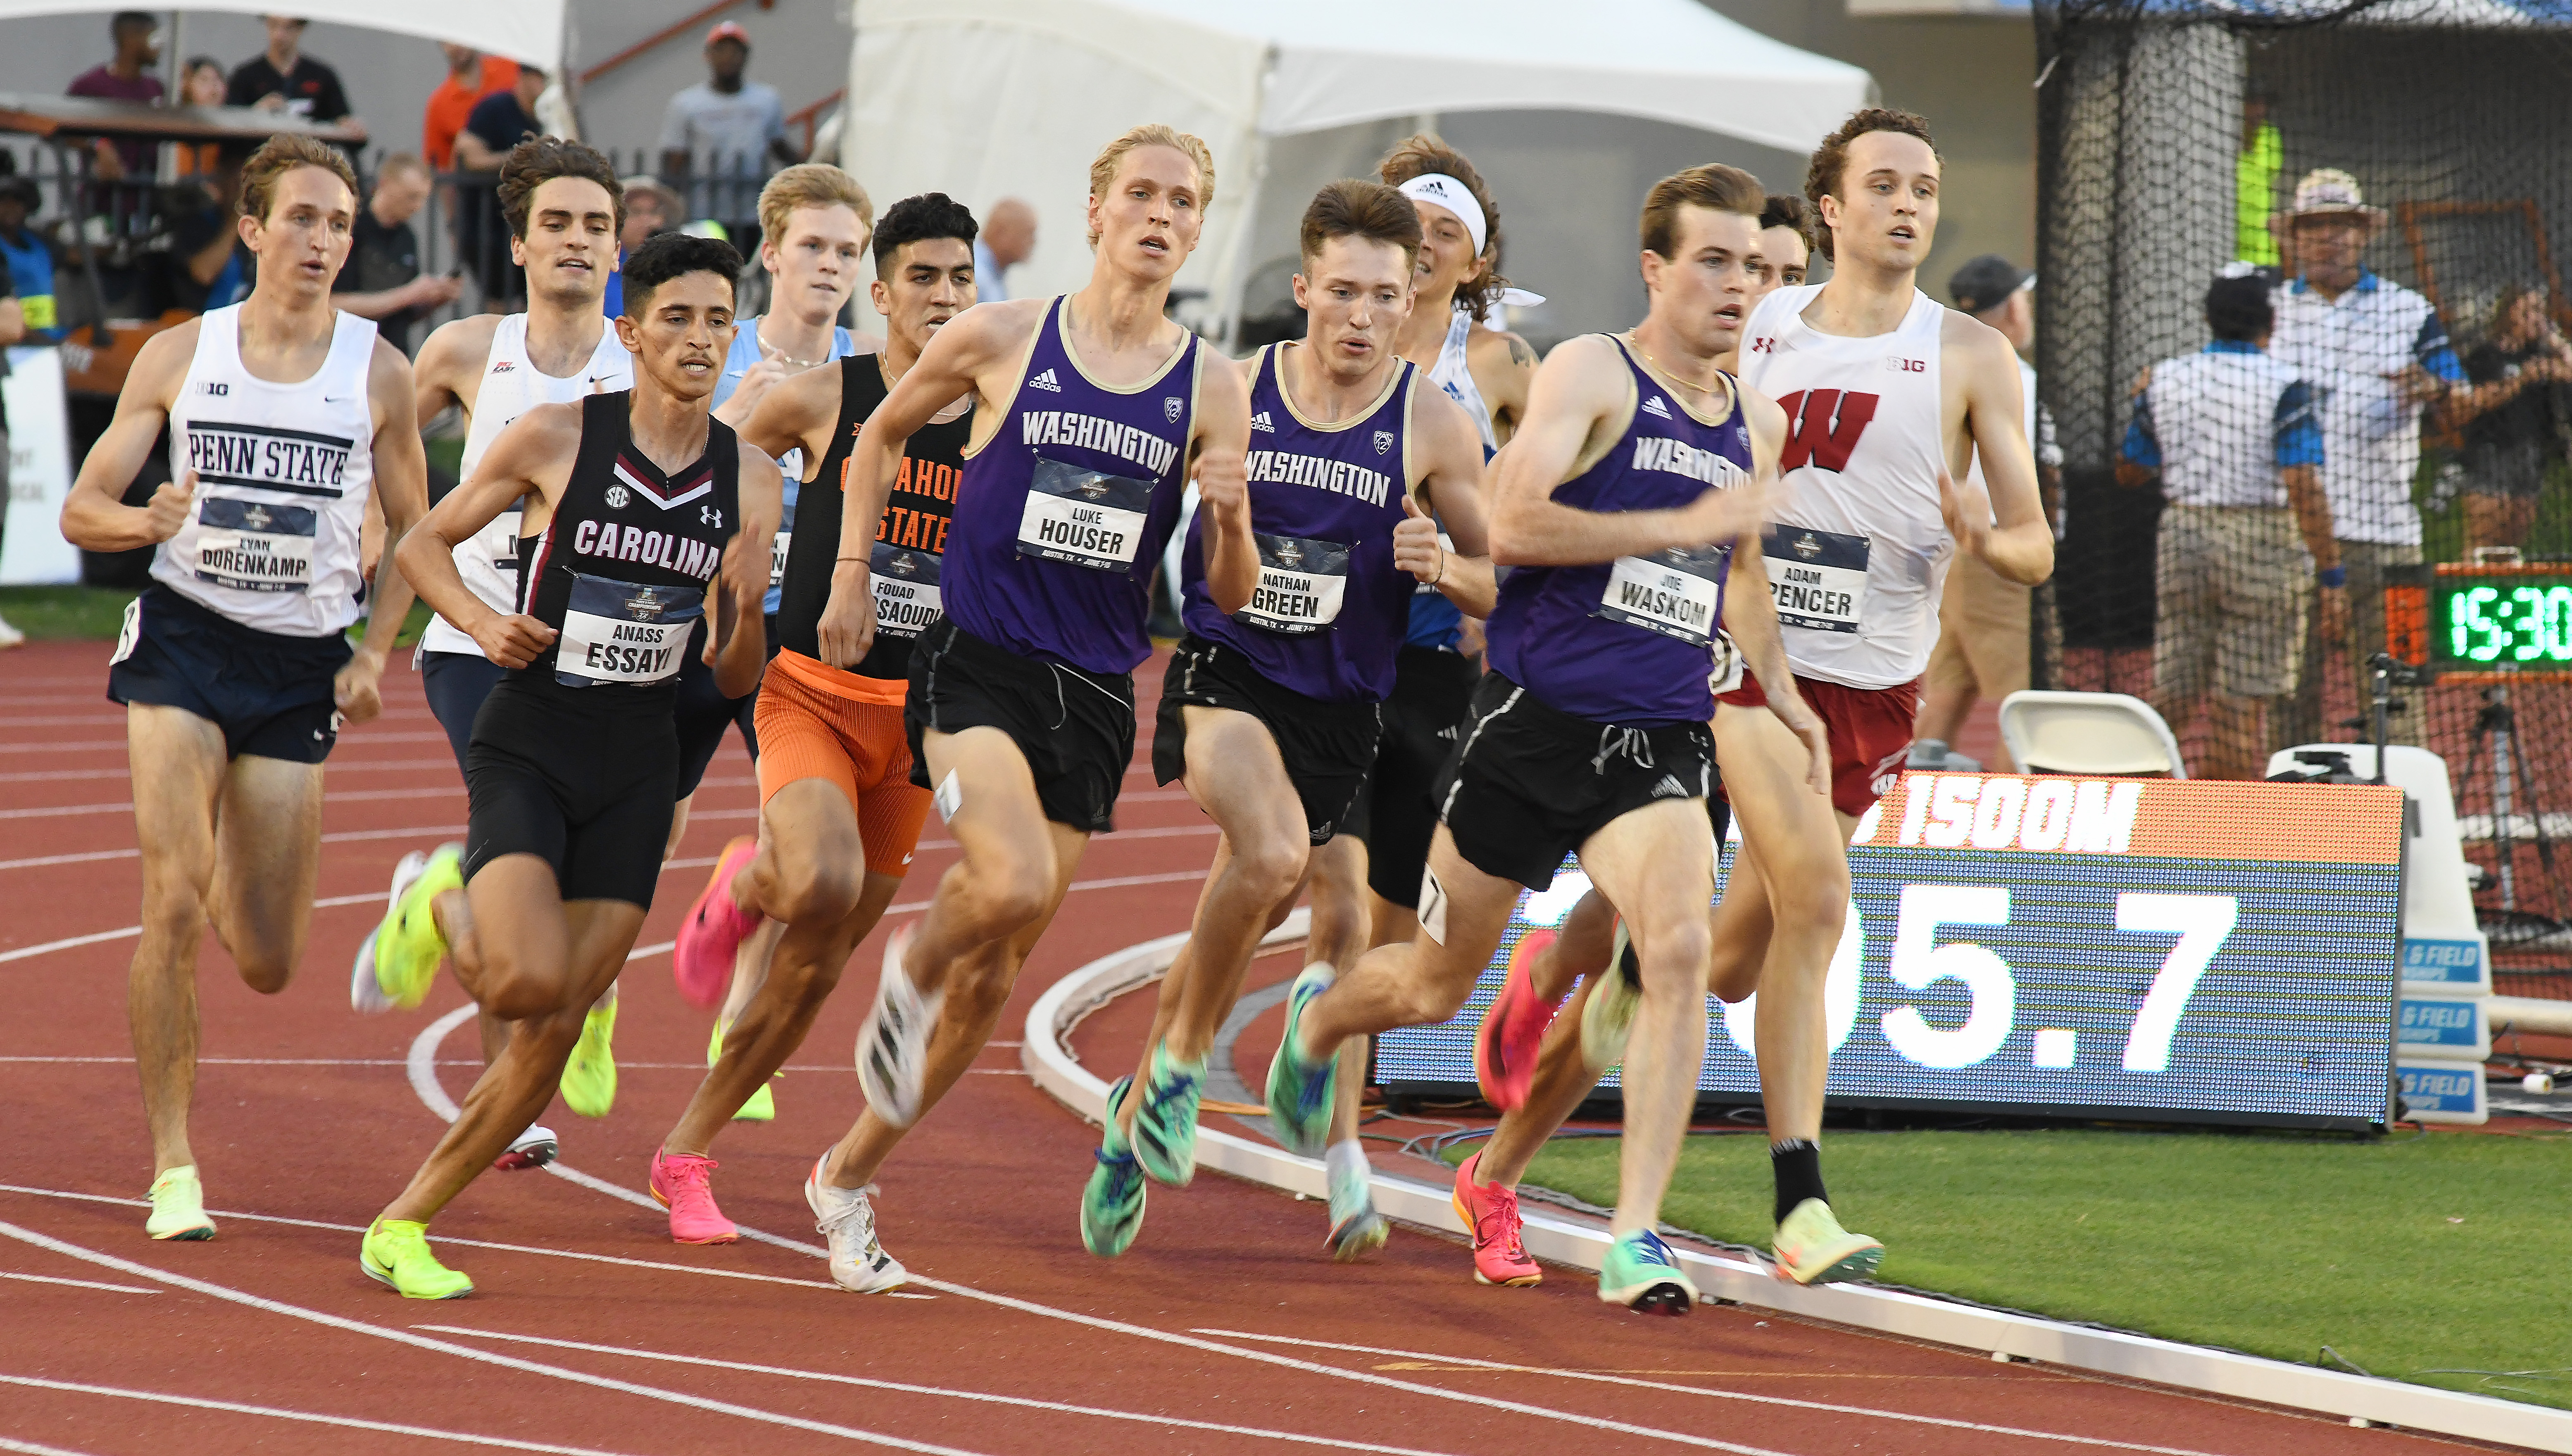 Mile City races to highlight UW Invitational on January 27th at